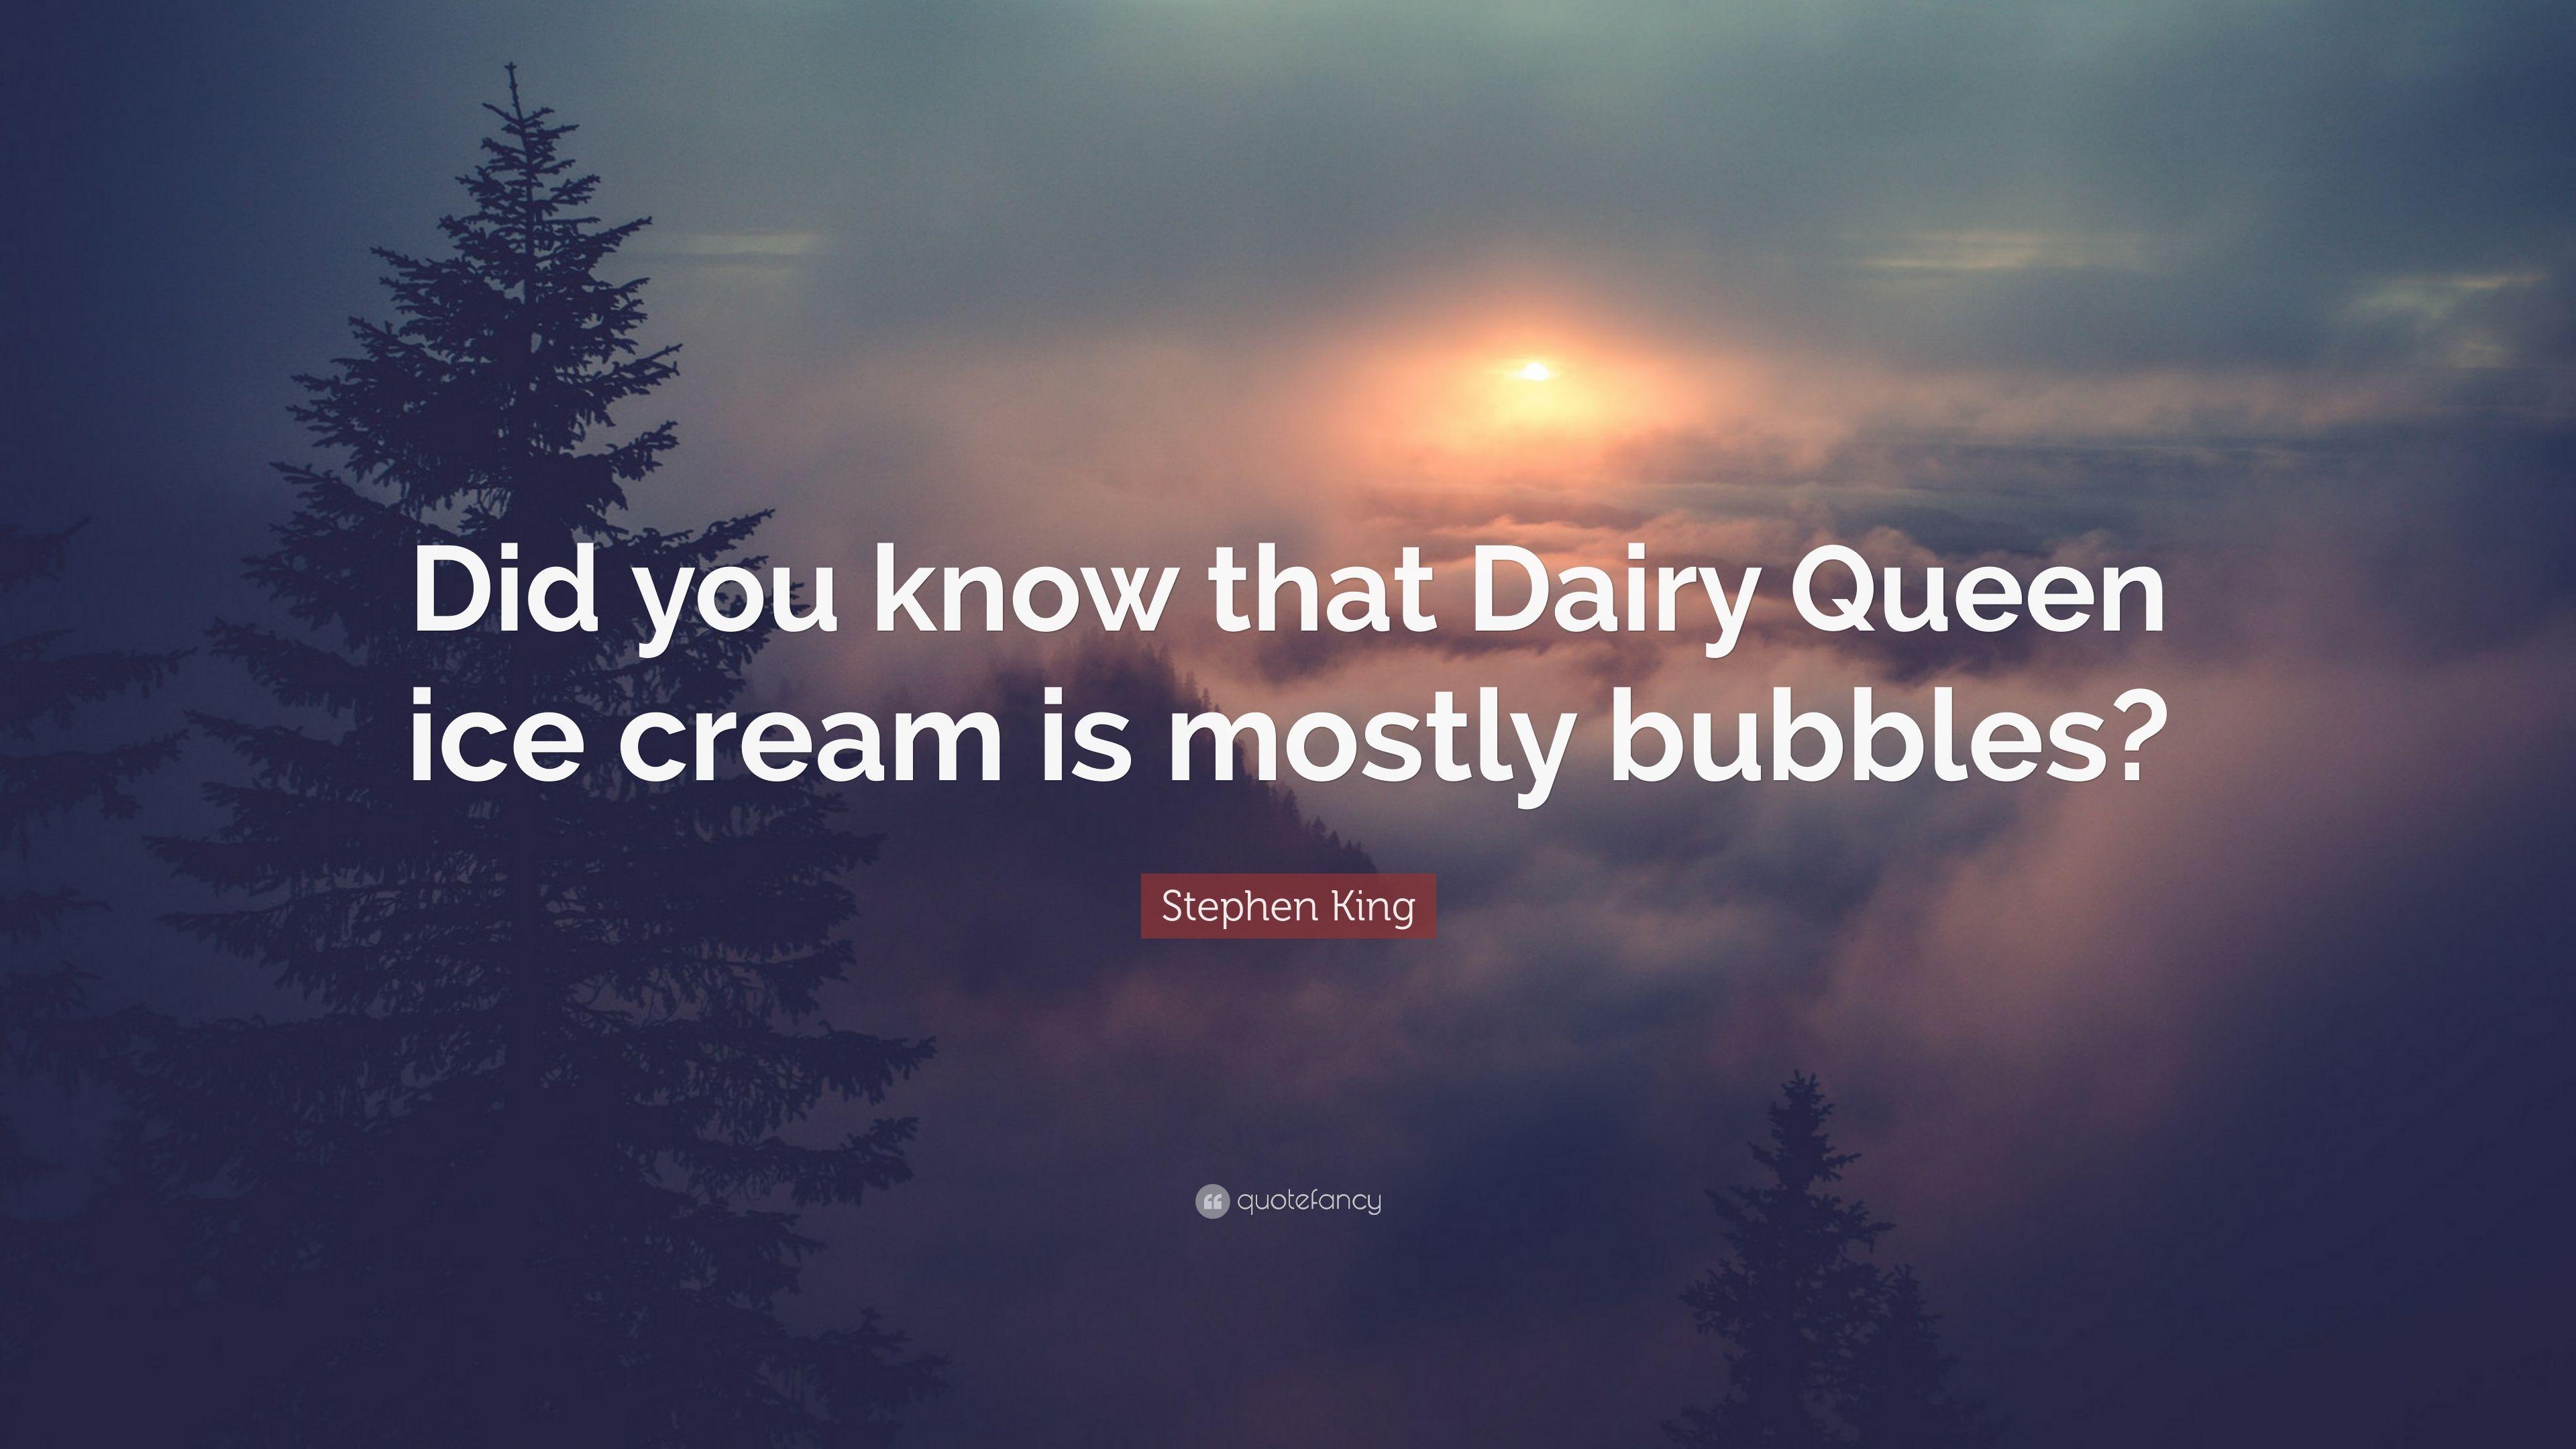 Stephen King Quote: “Did you know that Dairy Queen ice cream is